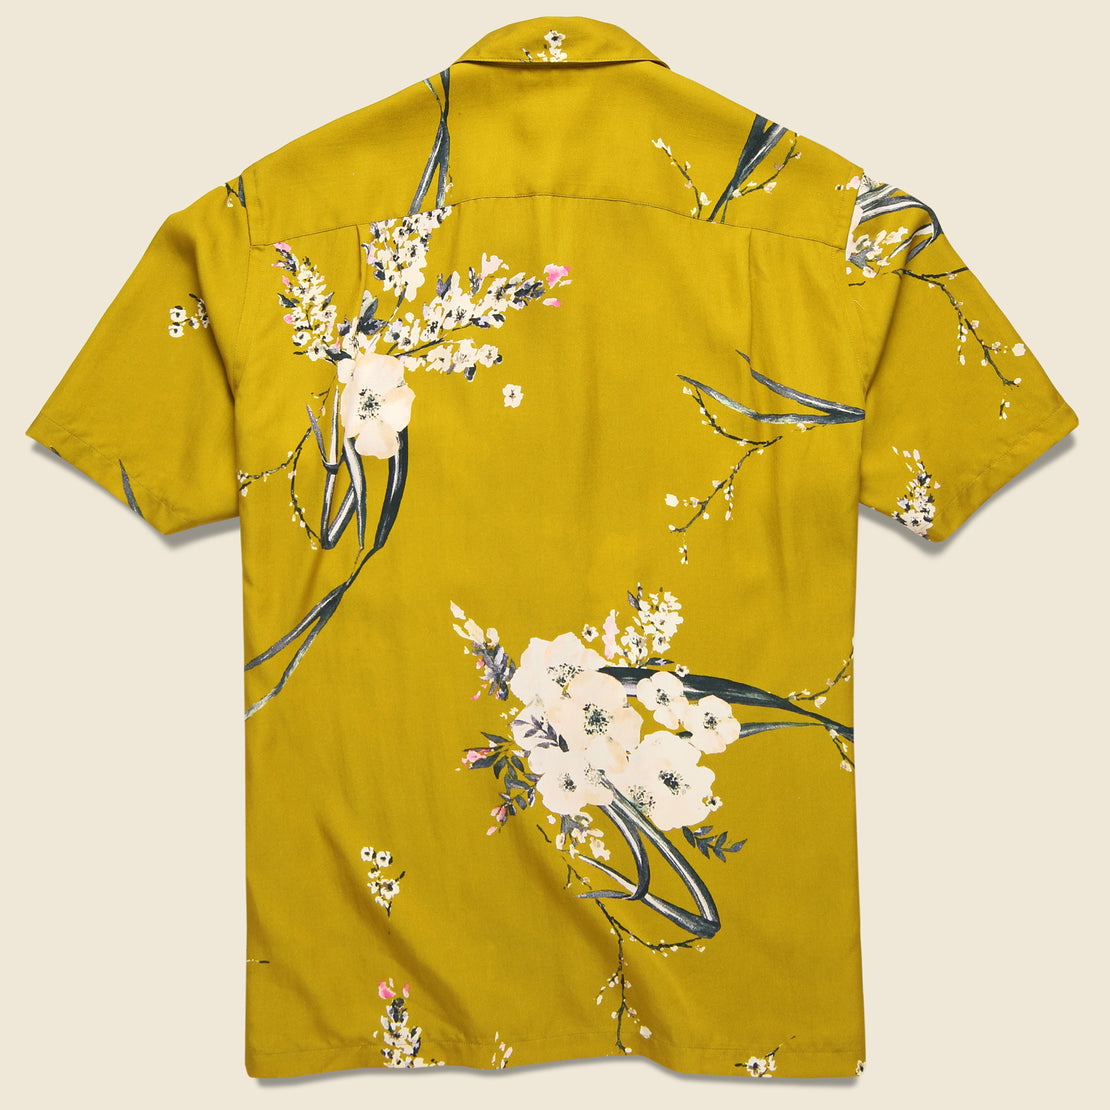 Blooming Shirt - Yellow - Portuguese Flannel - STAG Provisions - Tops - S/S Woven - Other Pattern